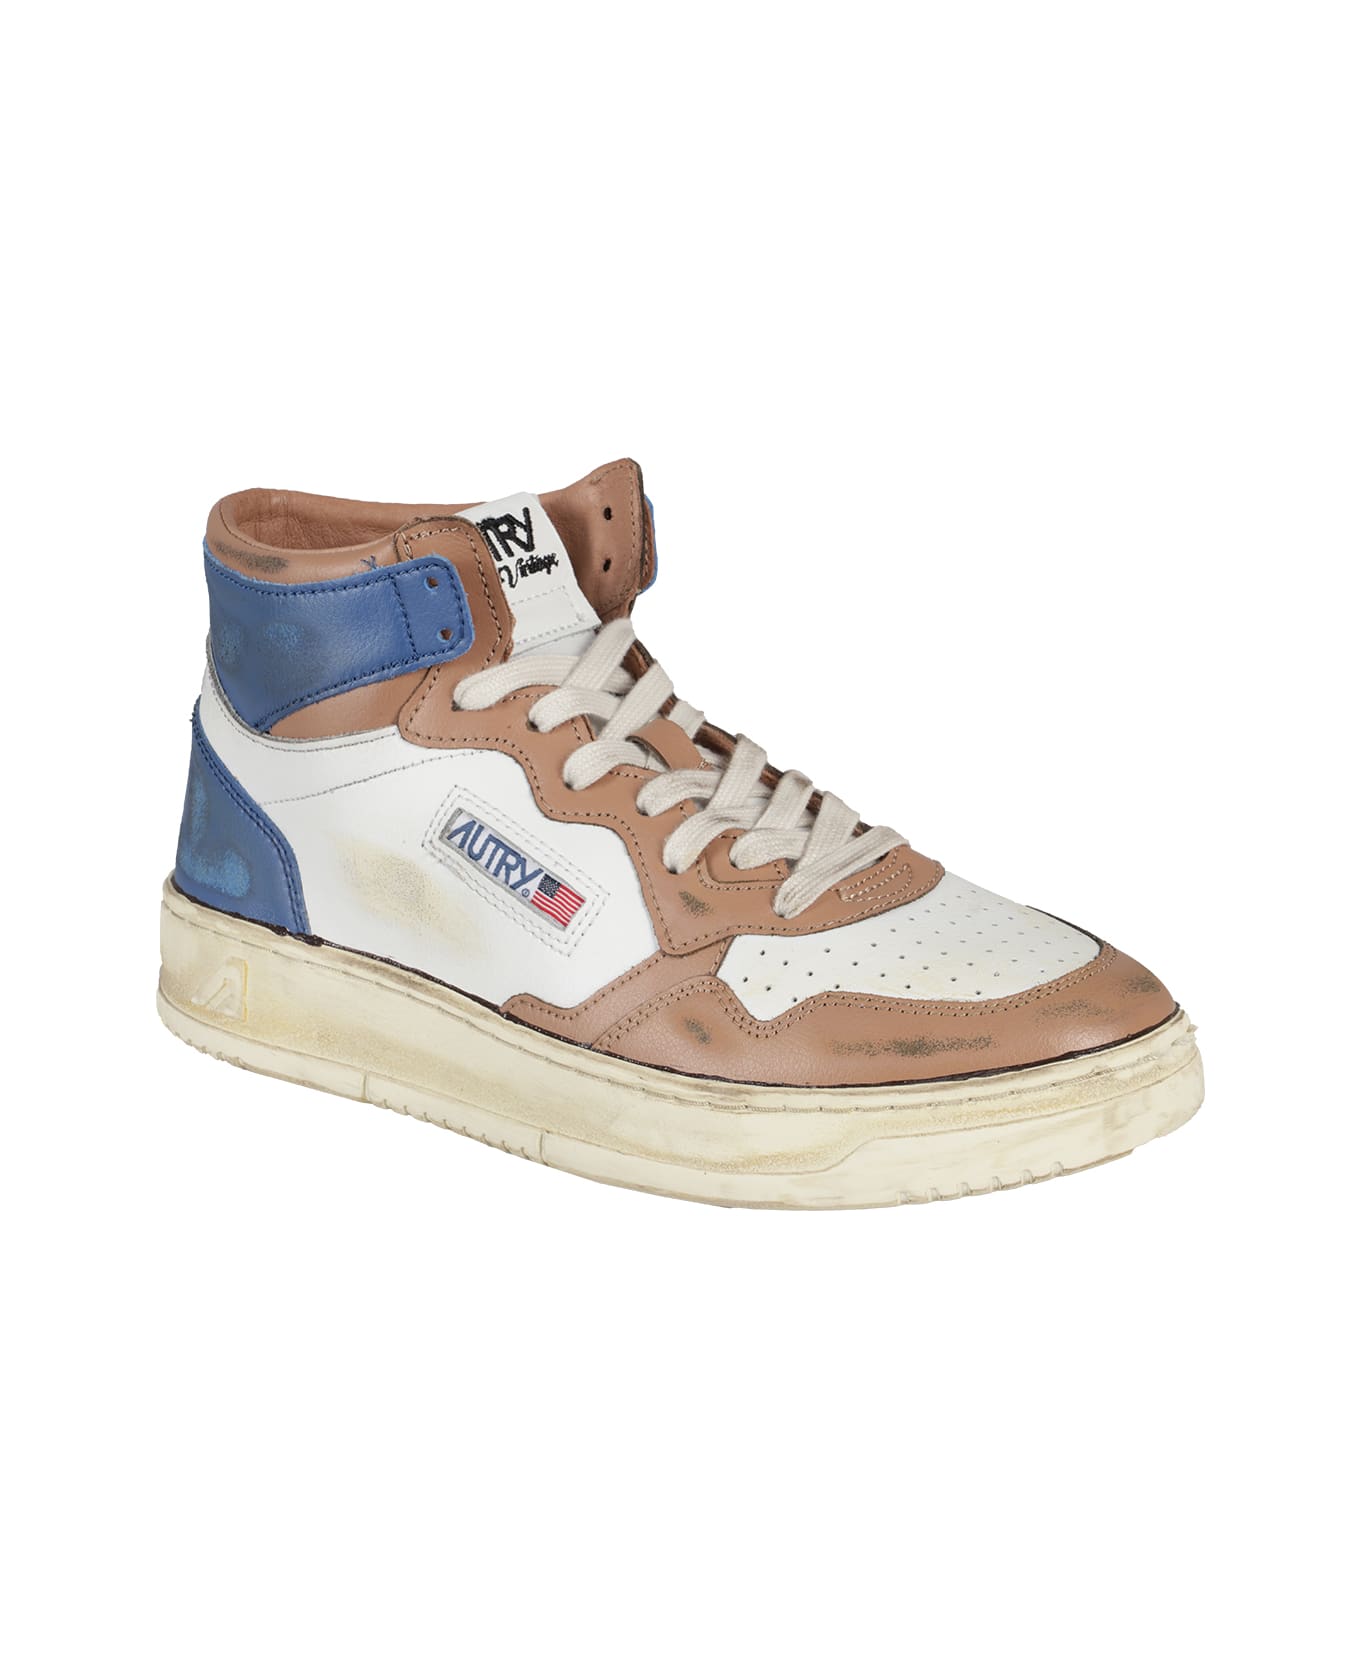 Autry Super Vintage Mid Sneakers Avmm Sv21 - White Cafe Blue